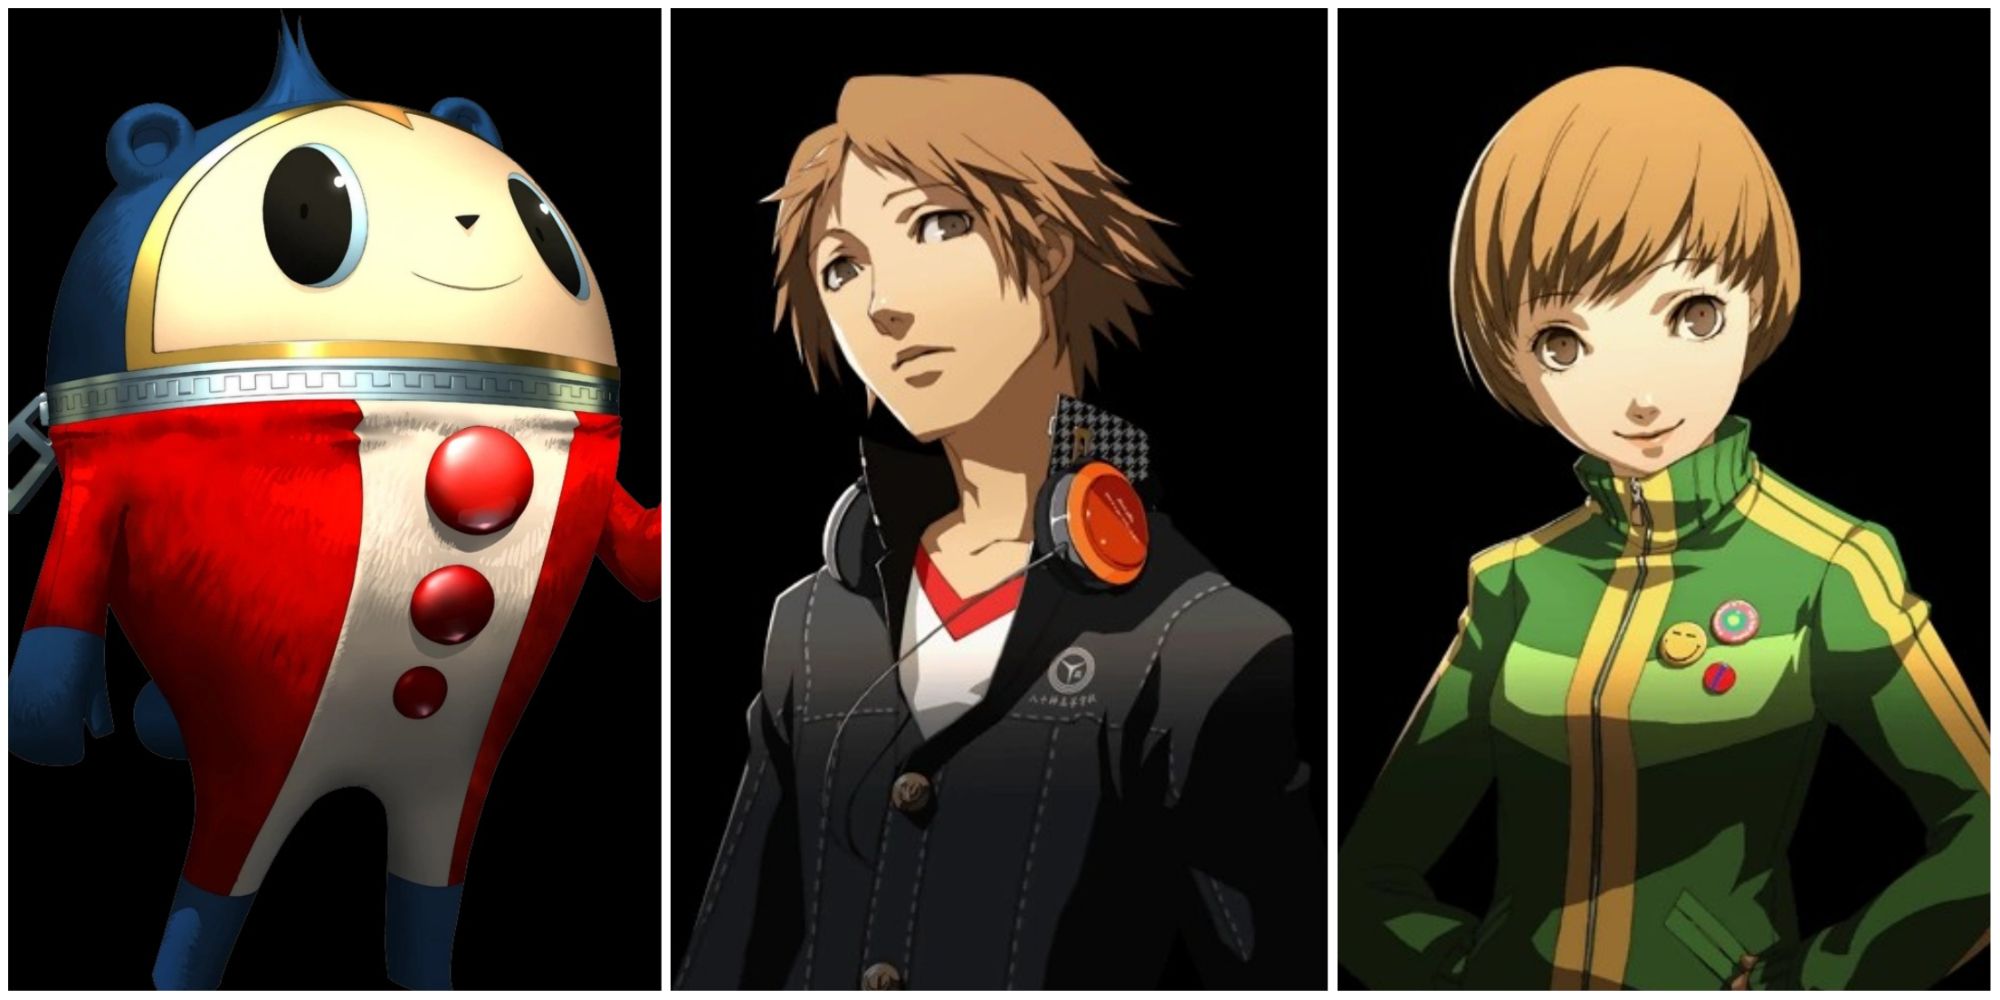 Teddie, Yosuke, and Chie from Persona 4